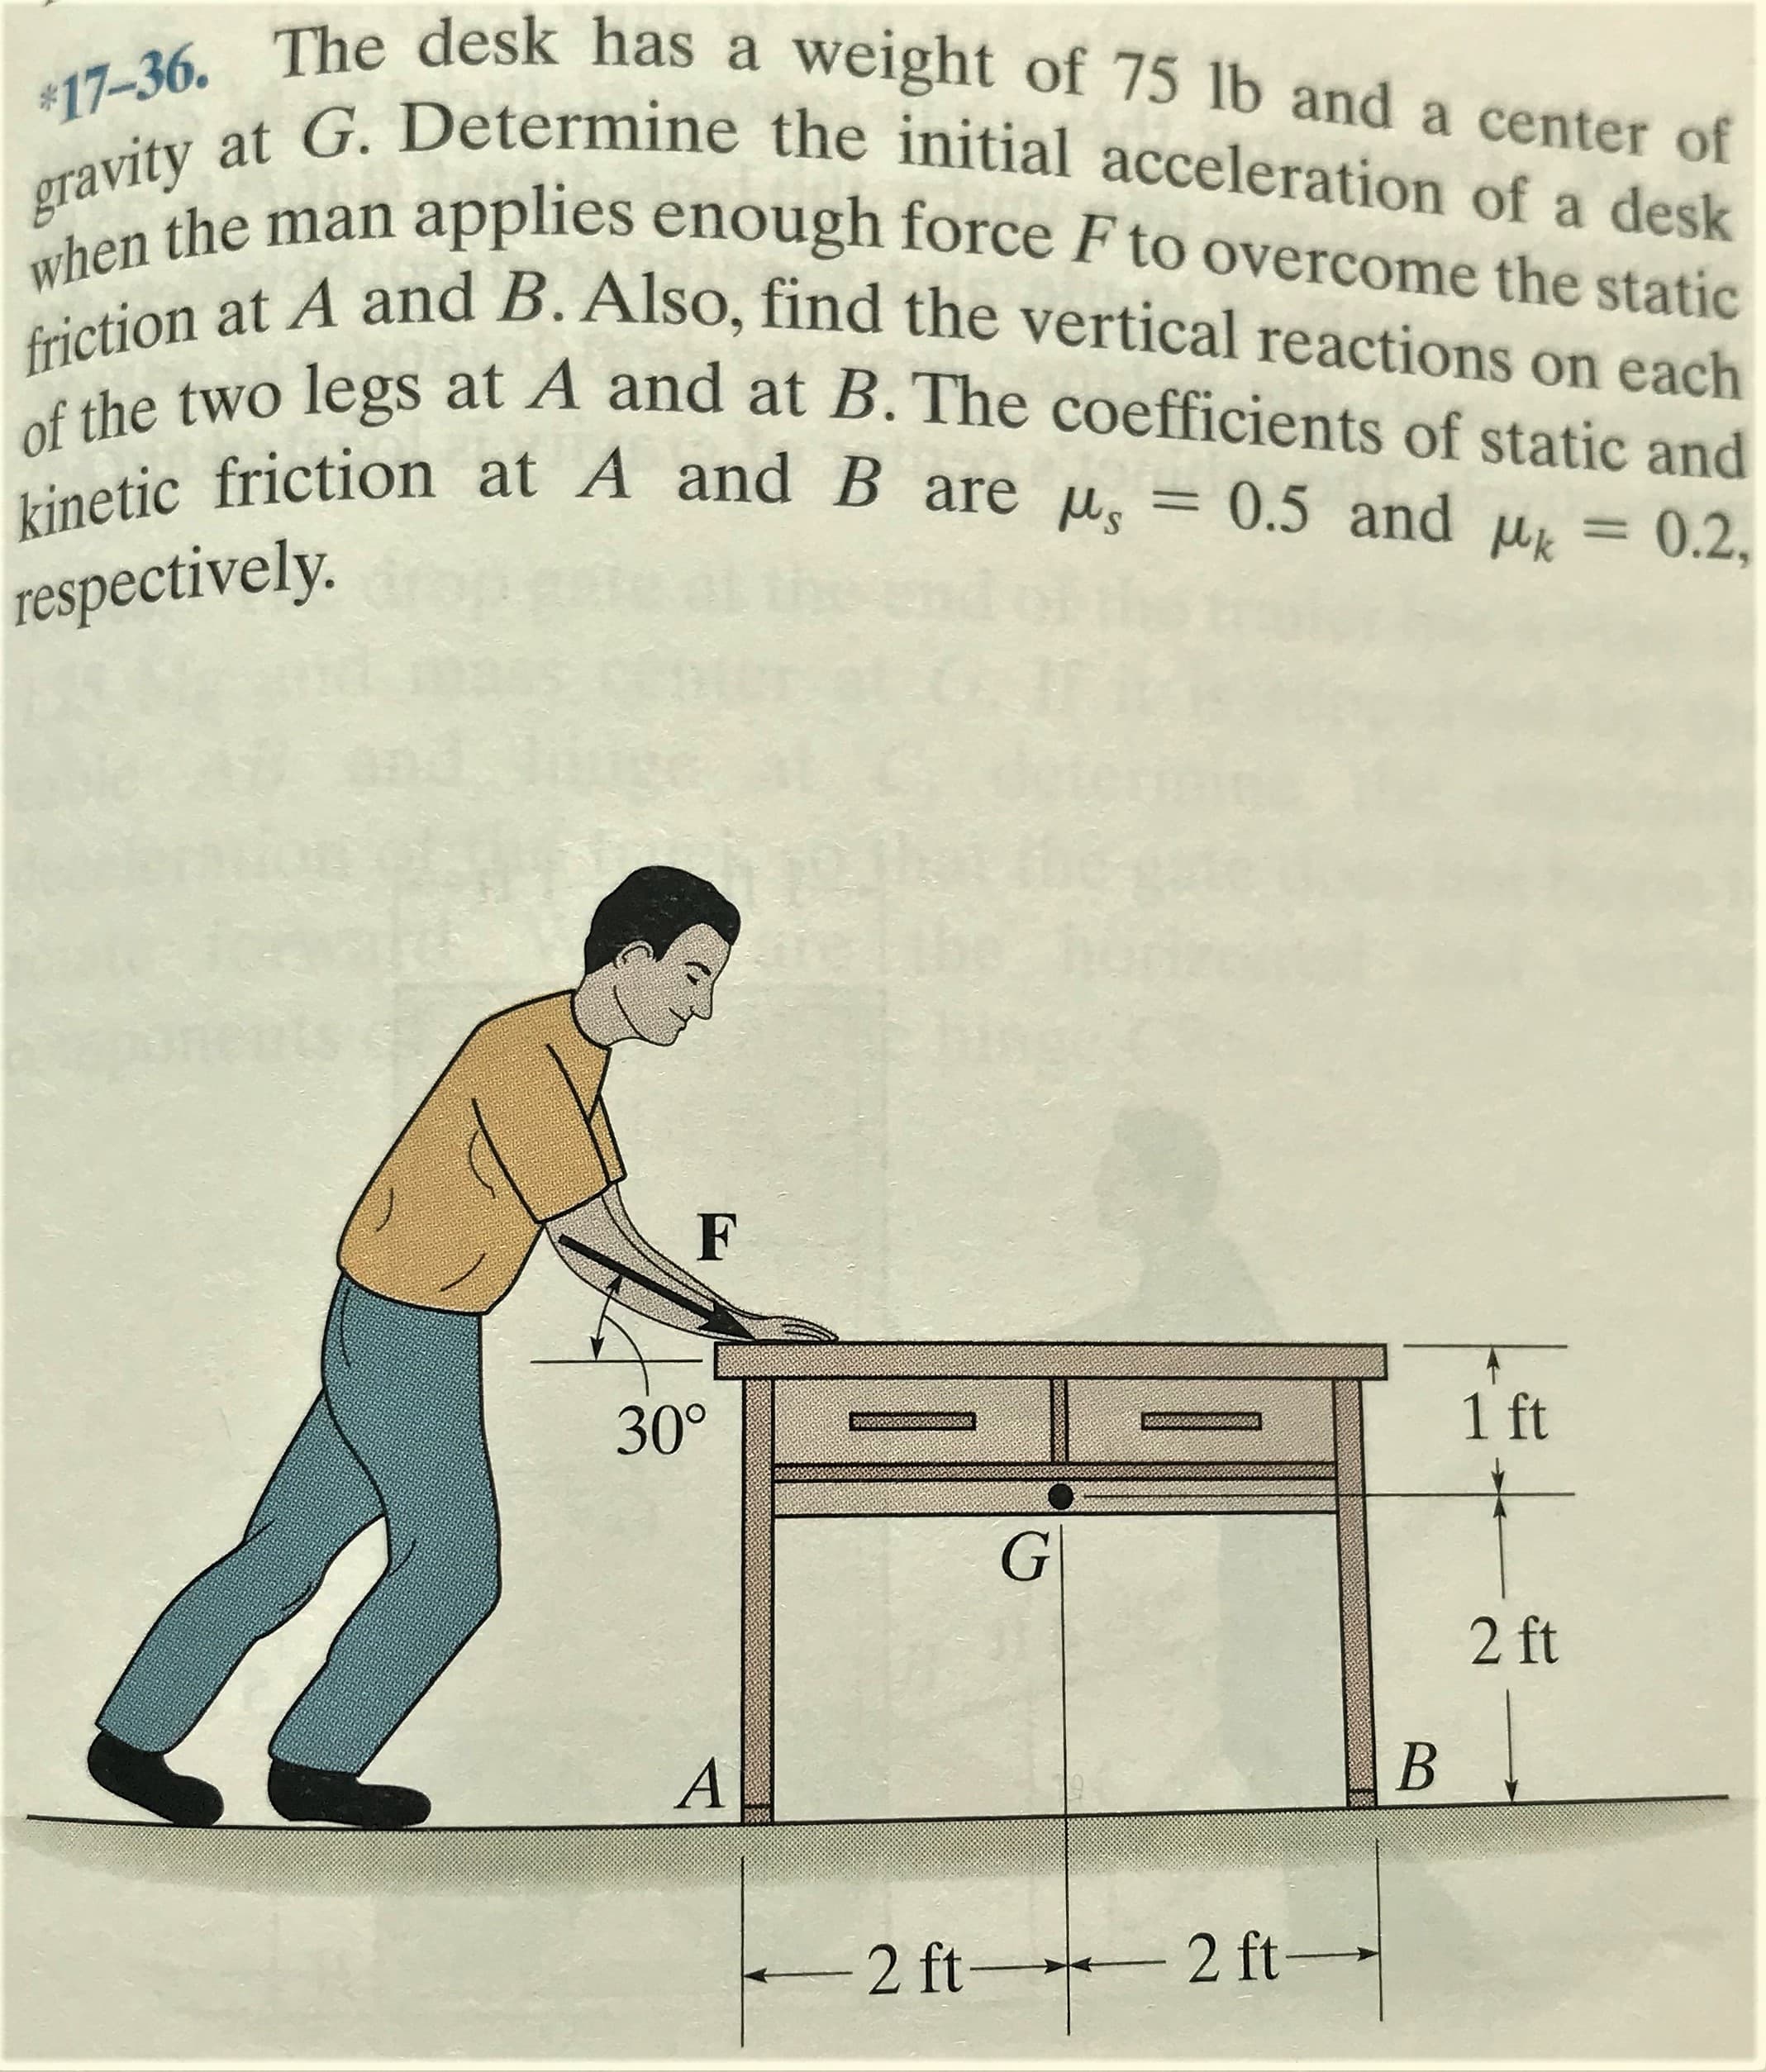 $17-36. The desk has a weight of 75 lb and a center of
gravity at G. Determine the initial acceleration of a desk
man applies enough force F to overcome the static
when the
friction at A and B. Also, find the vertical reactions on each
of the two legs at A and at B. The coefficients of static and
kinetic friction at A andB are µ̟ = 0.5 and µk = 0.2,
respectively.
30°
1 ft
2 ft
2 ft 2 ft-
